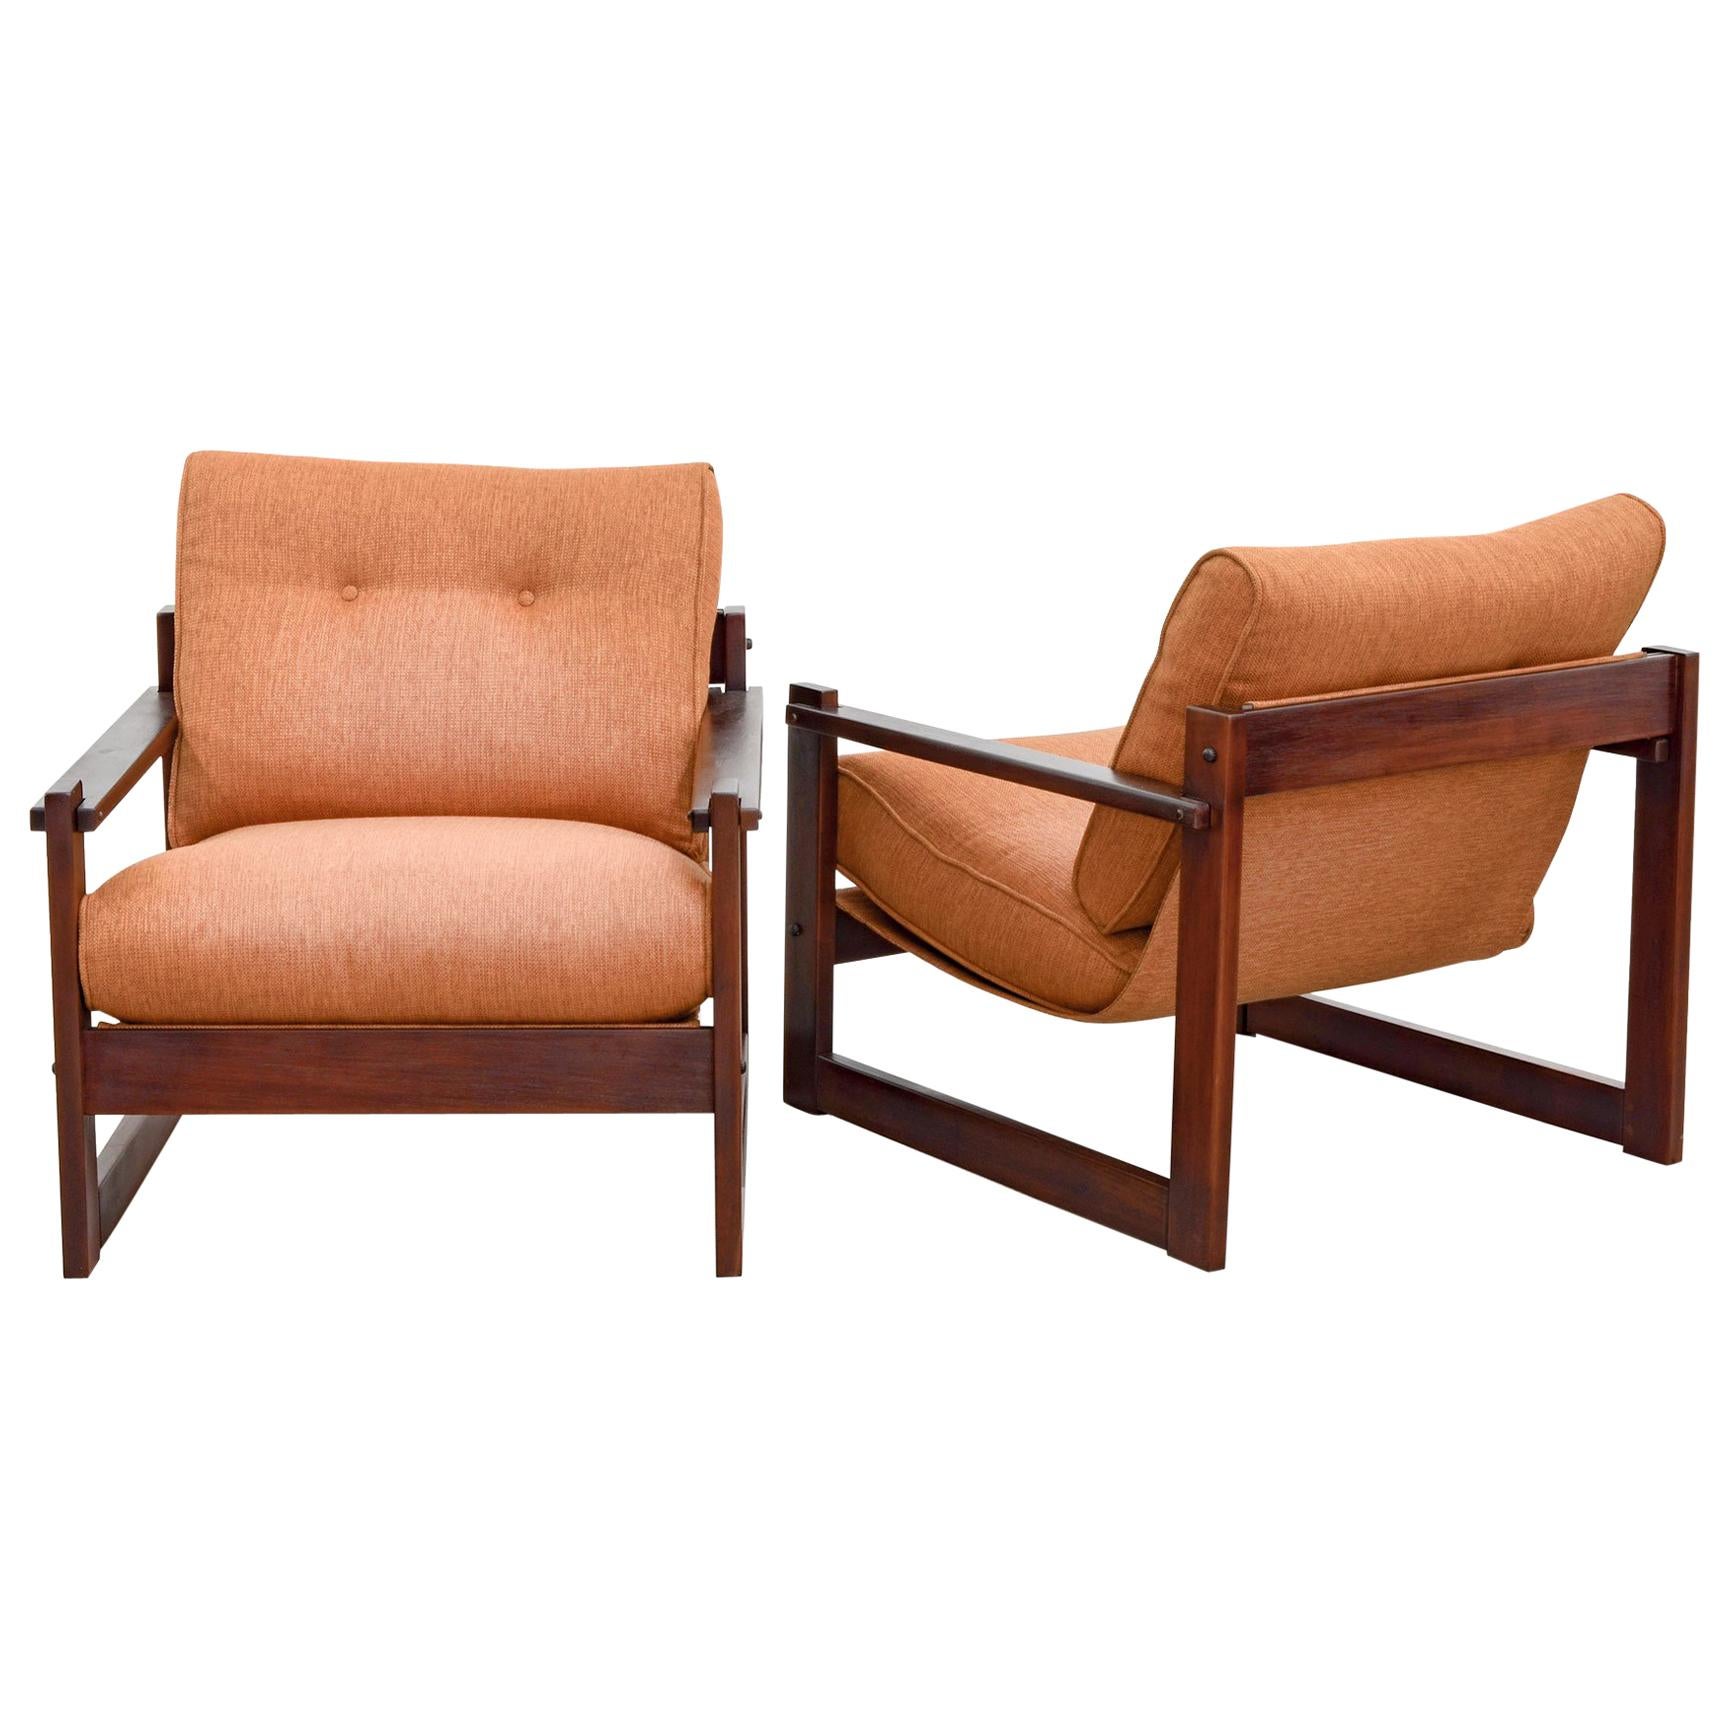 Pair of Armchairs in Rosewood, by Percival Lafer, Mid-Century Modern